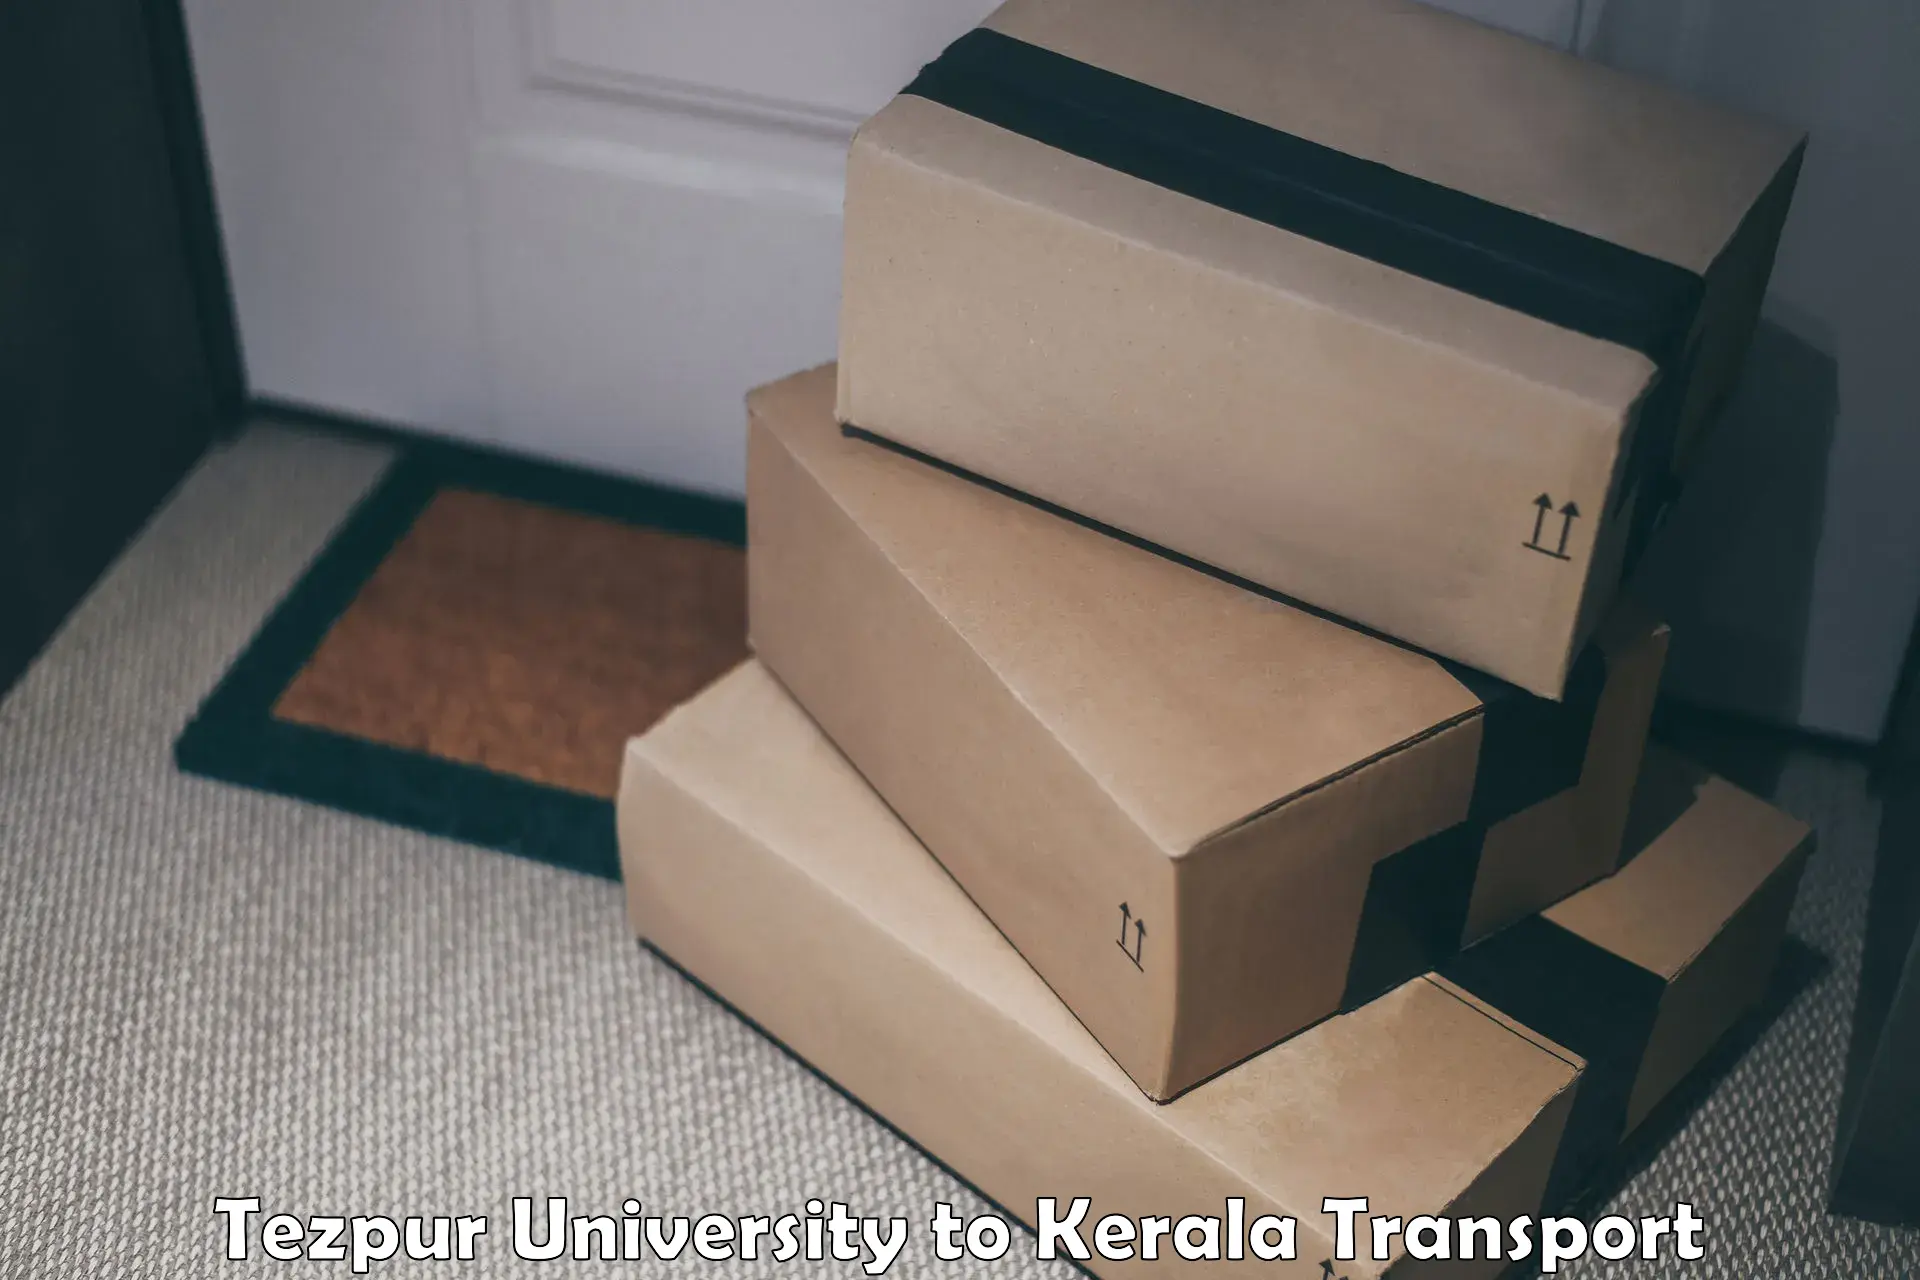 Goods delivery service Tezpur University to Ponnani